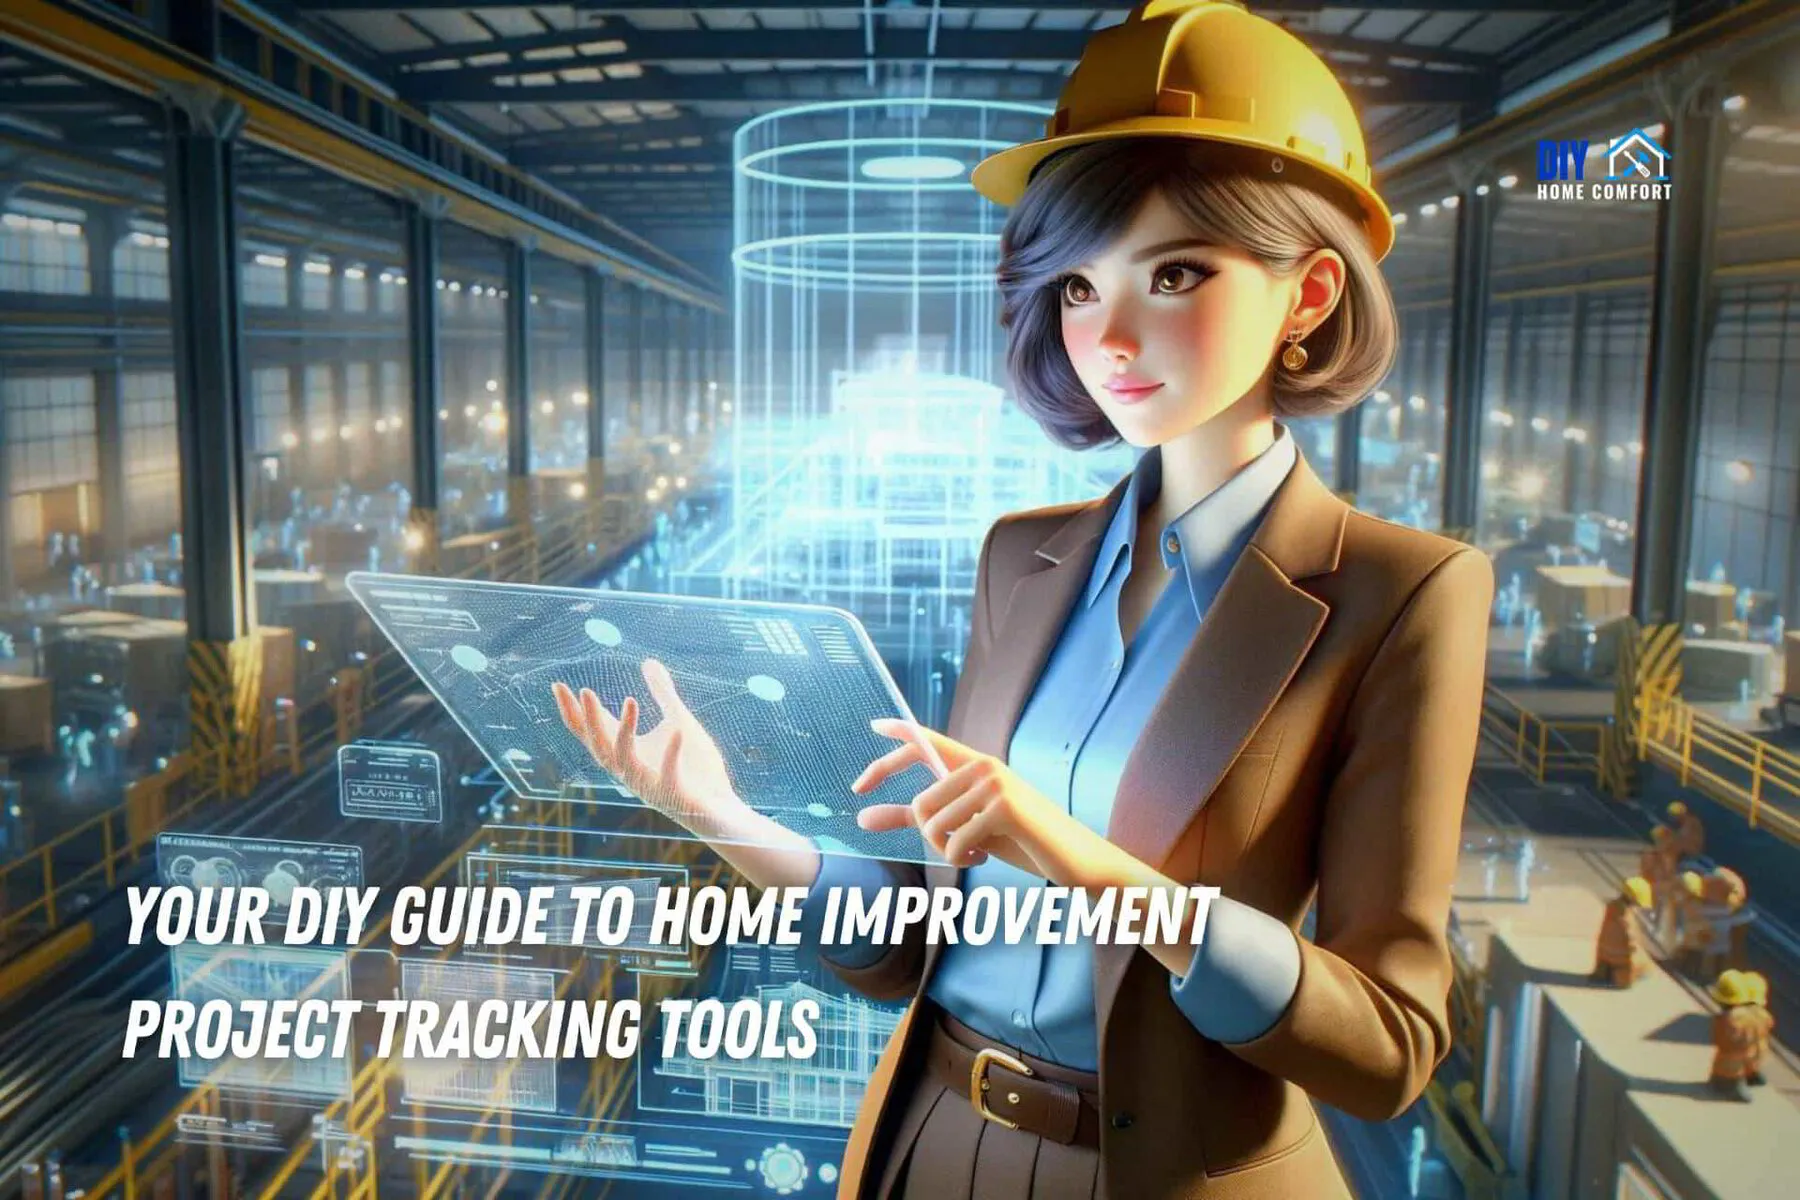 Your DIY Guide to Home Improvement Project Tracking Tools | DIY Home Comfort